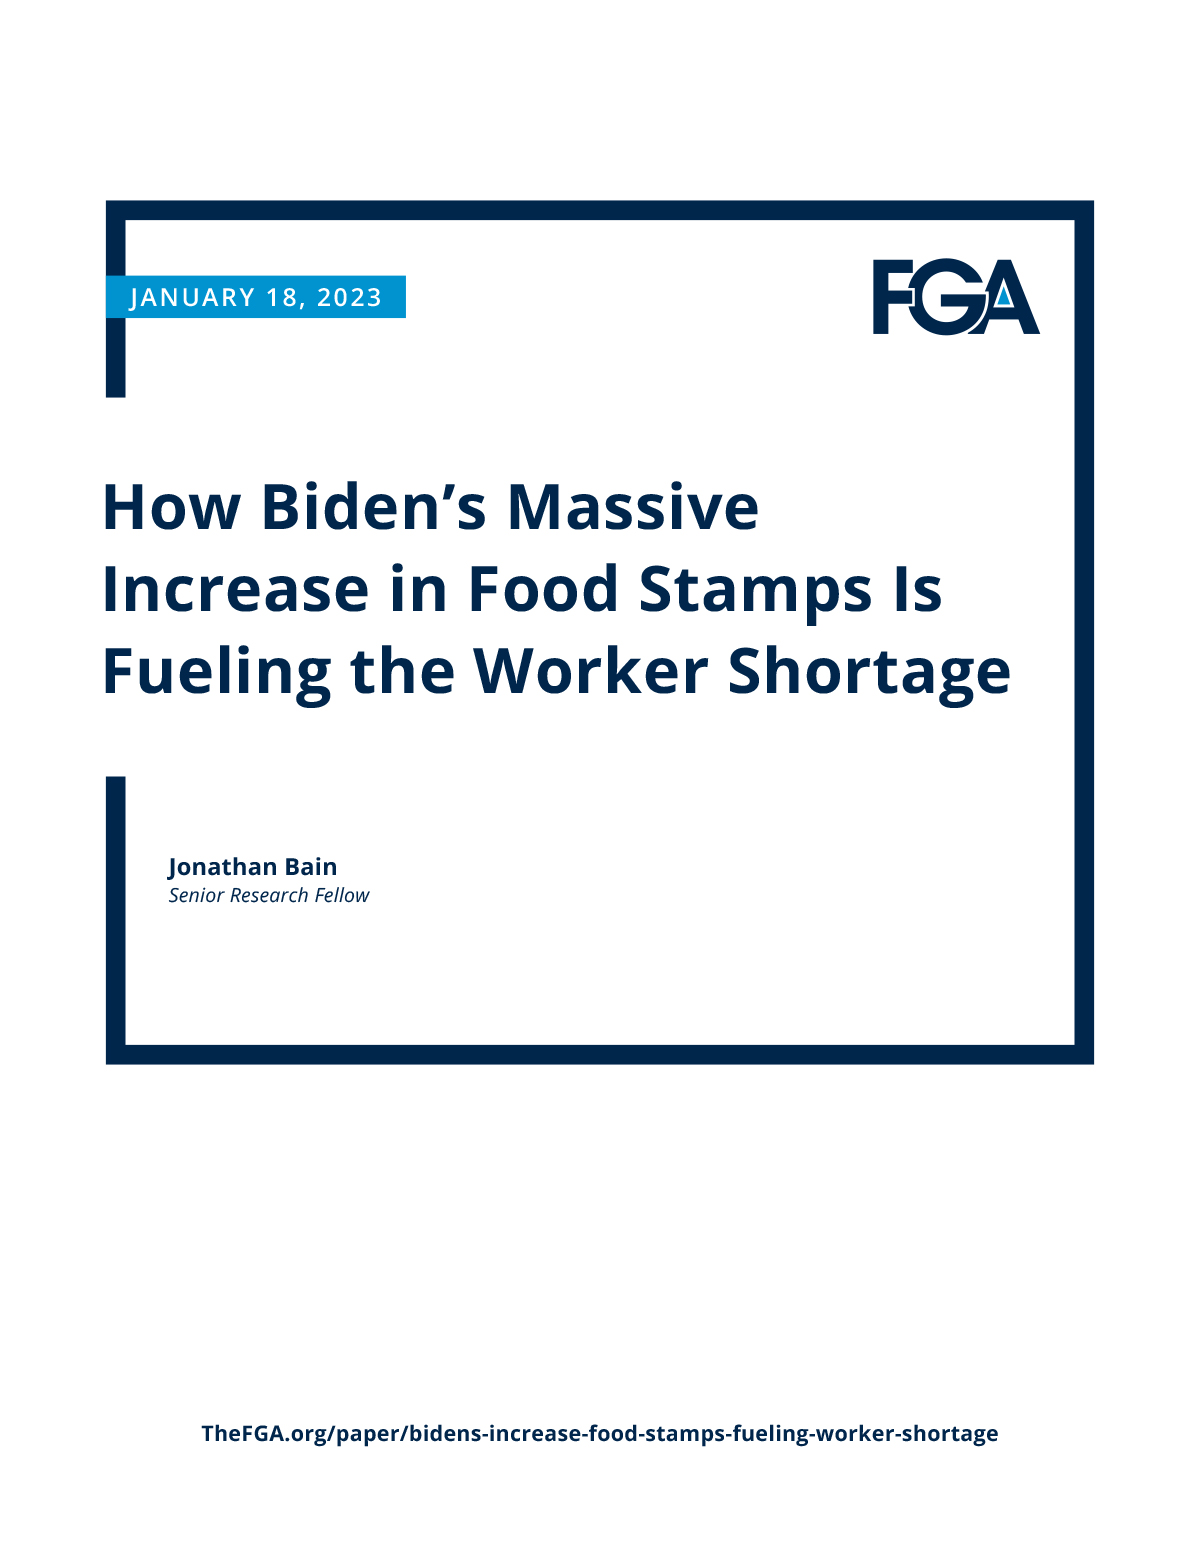 How Biden’s Massive Increase in Food Stamps Is Fueling the Worker Shortage